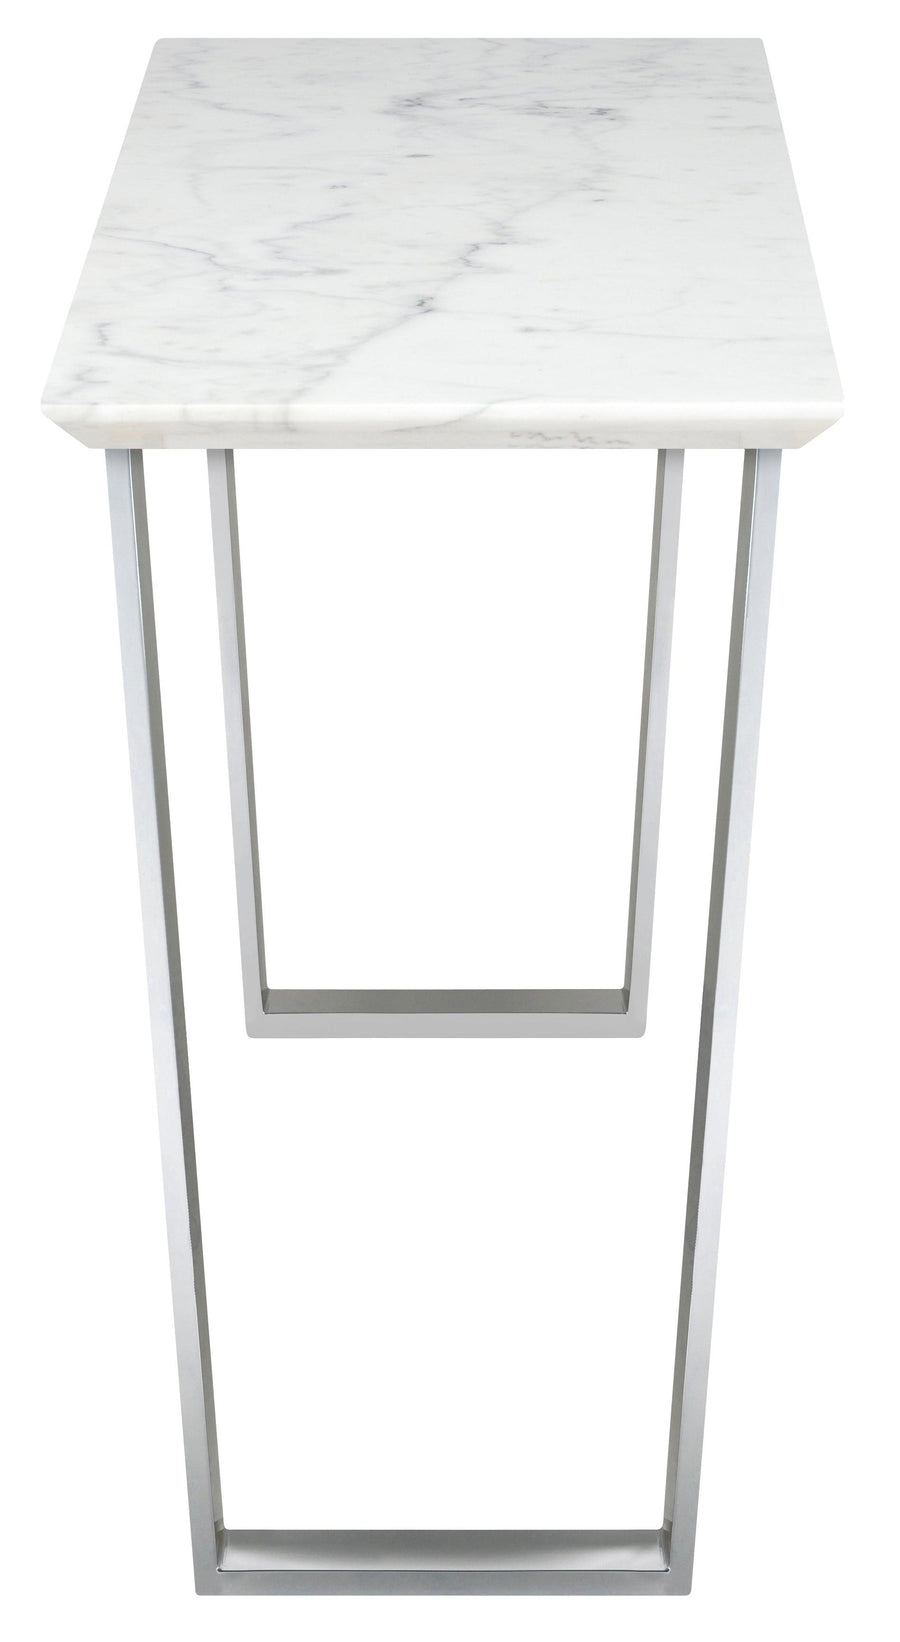 Catrine Console Table-White Marble/Stainless Steel - Maison Vogue